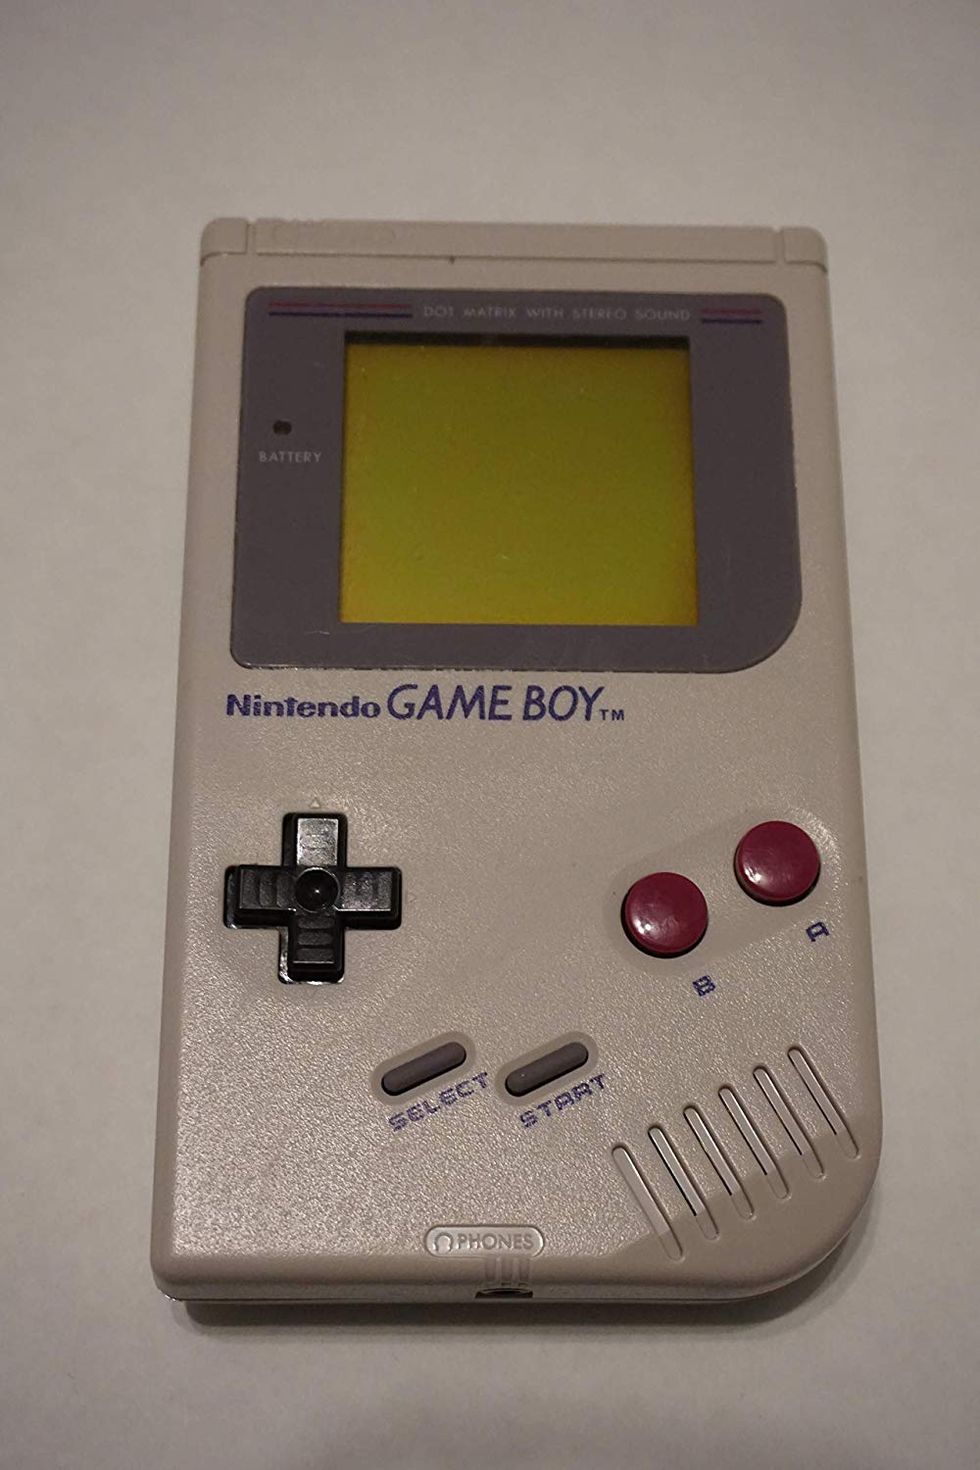 Gadget, Game boy console, Game boy, Technology, Portable electronic game, Electronic device, Handheld game console, Game boy advance, Video game console, Game boy accessories, 